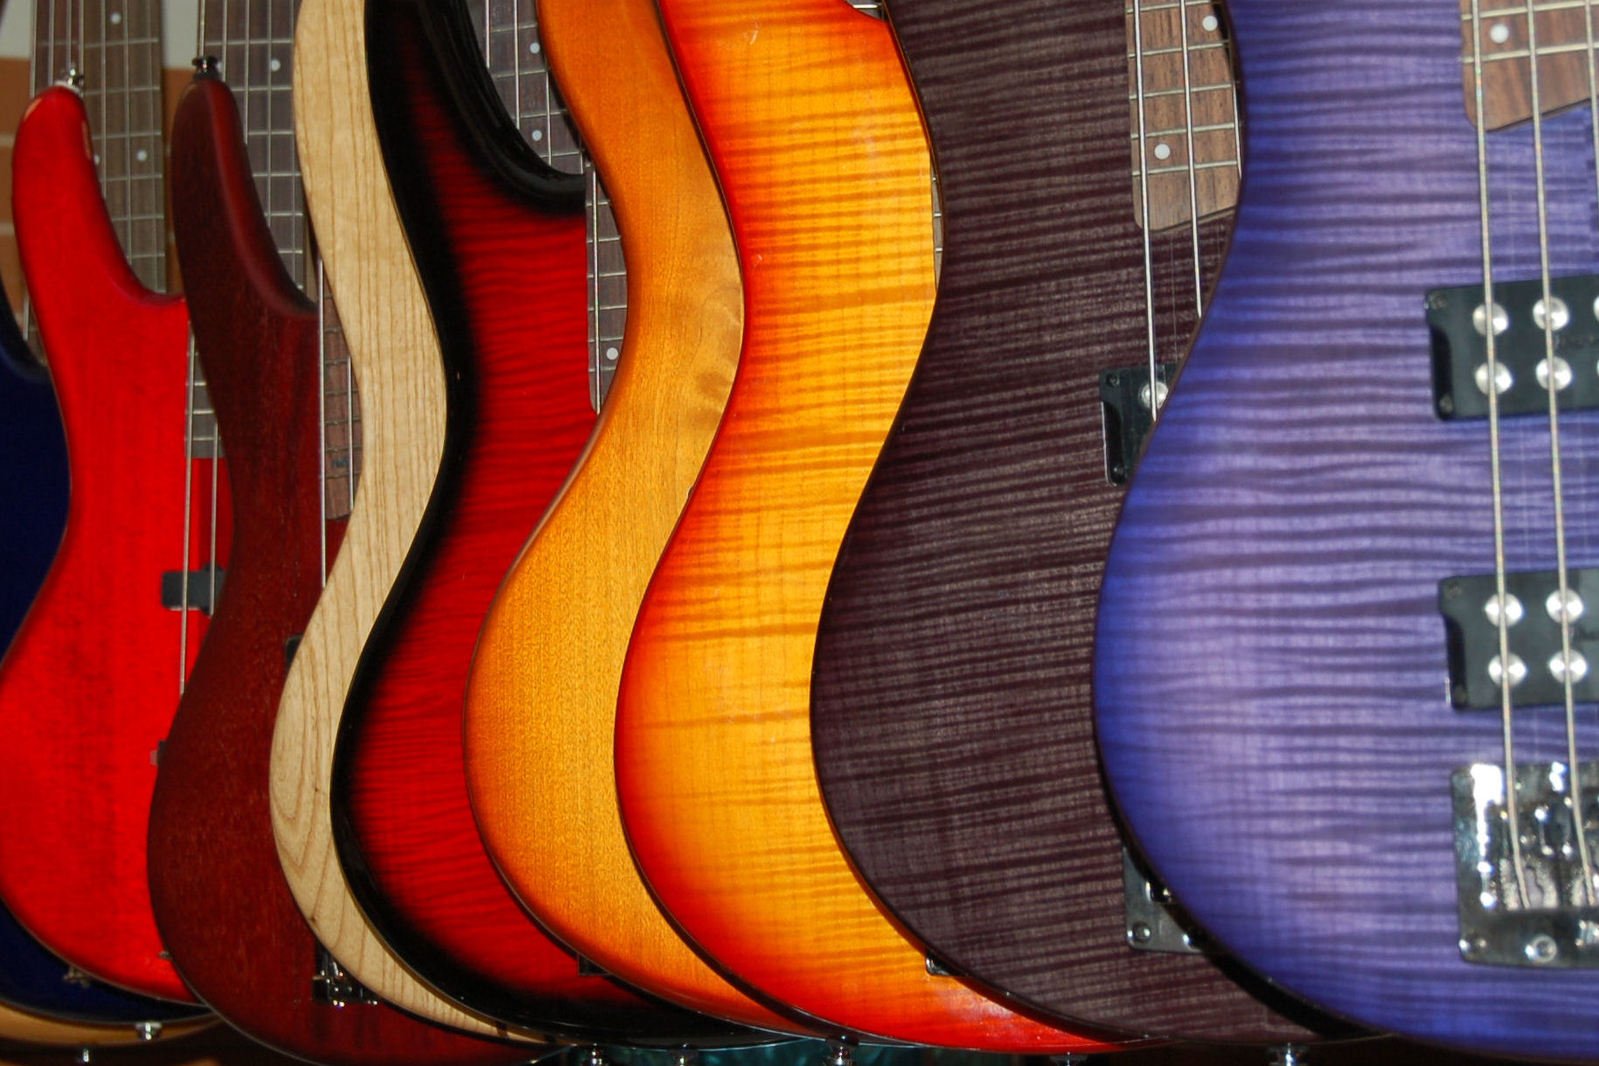 several different colors of guitars are shown